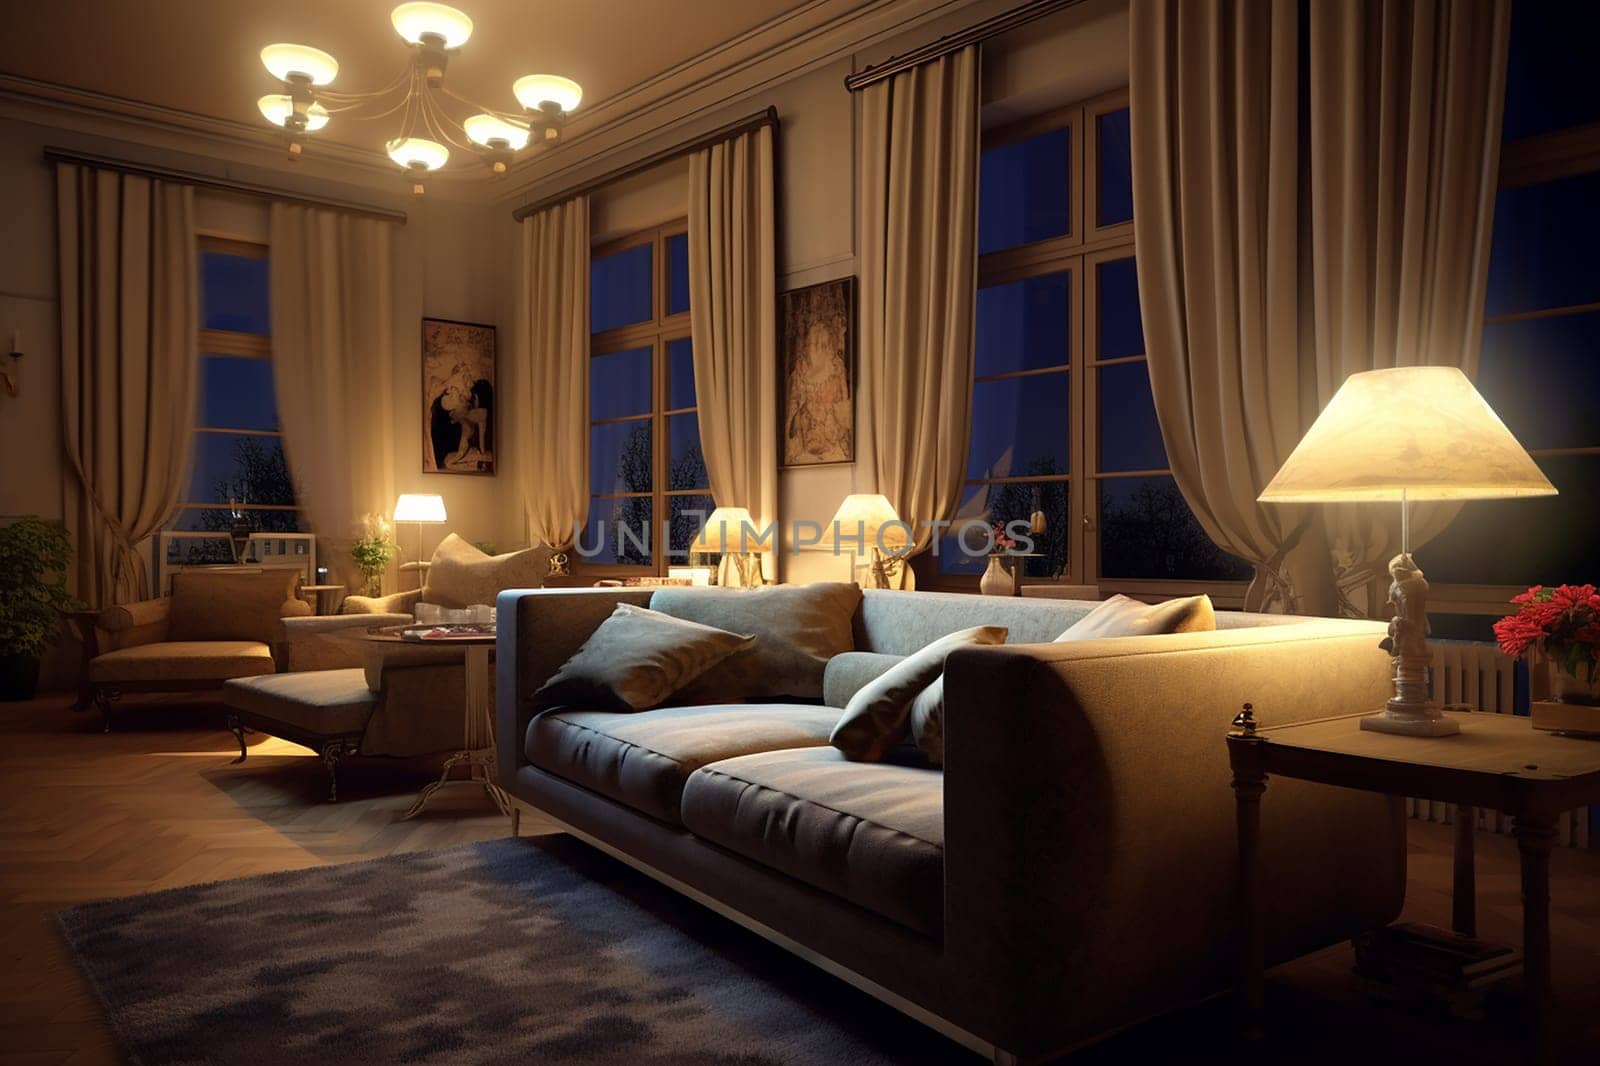 Cozy living room at night with warm lighting, comfortable sofa, and elegant decor.